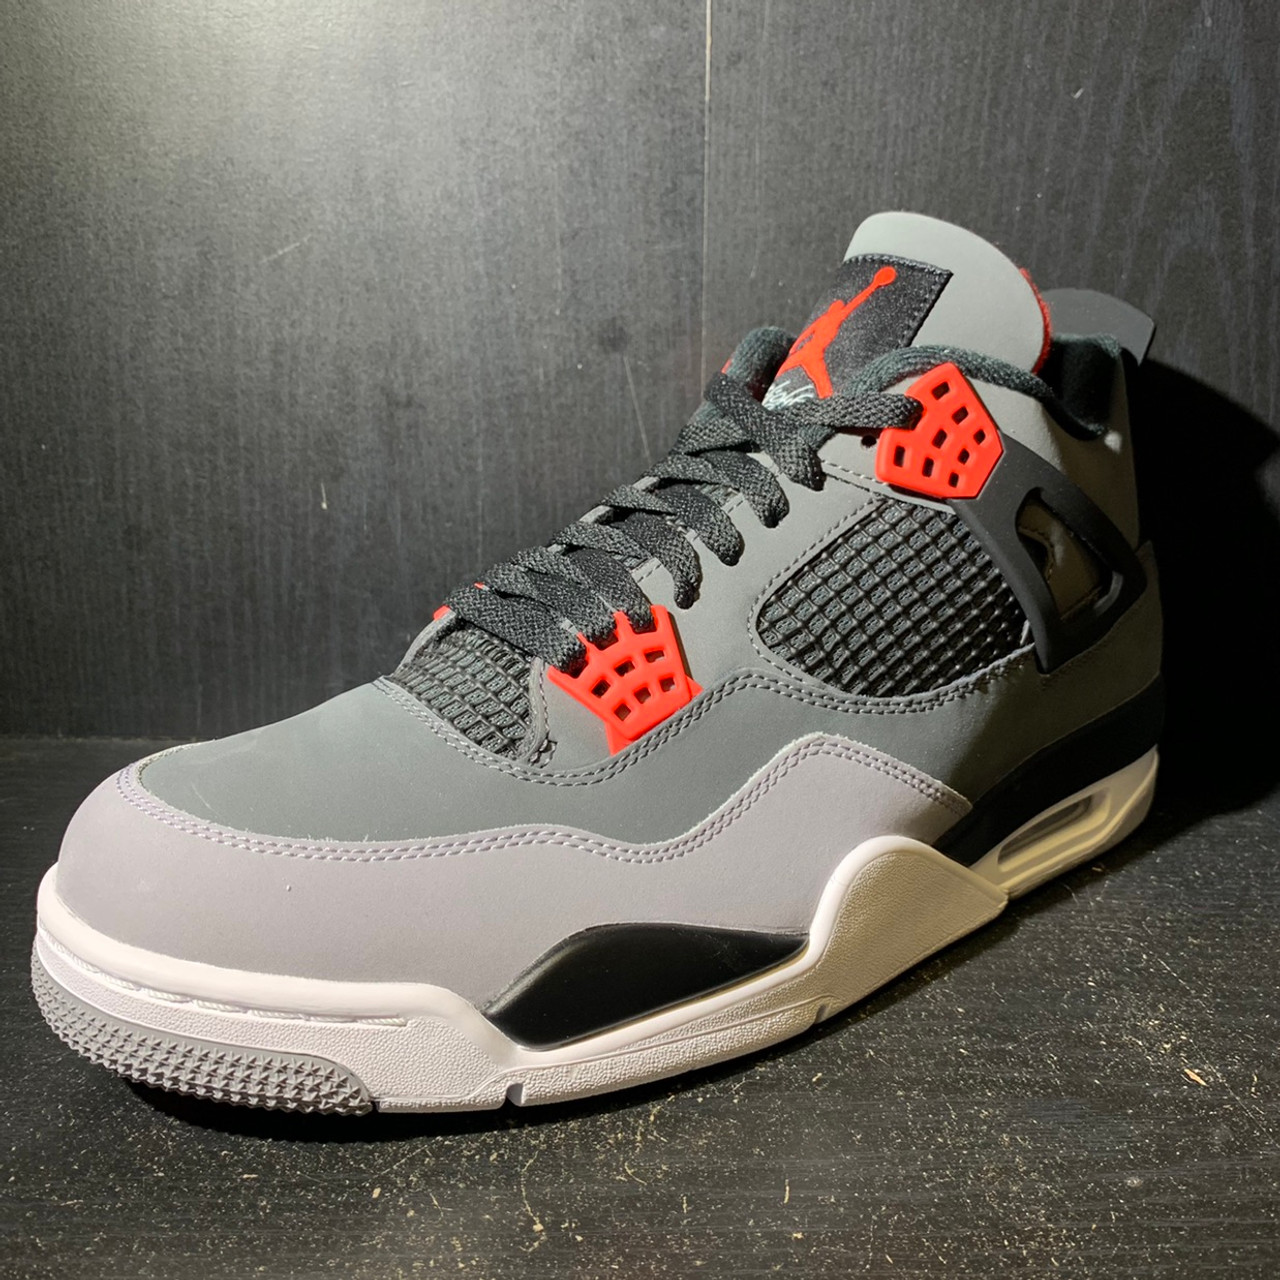 Air Jordan 4 'Infrared' Images & Release Info: Here's How to Buy It –  Footwear News